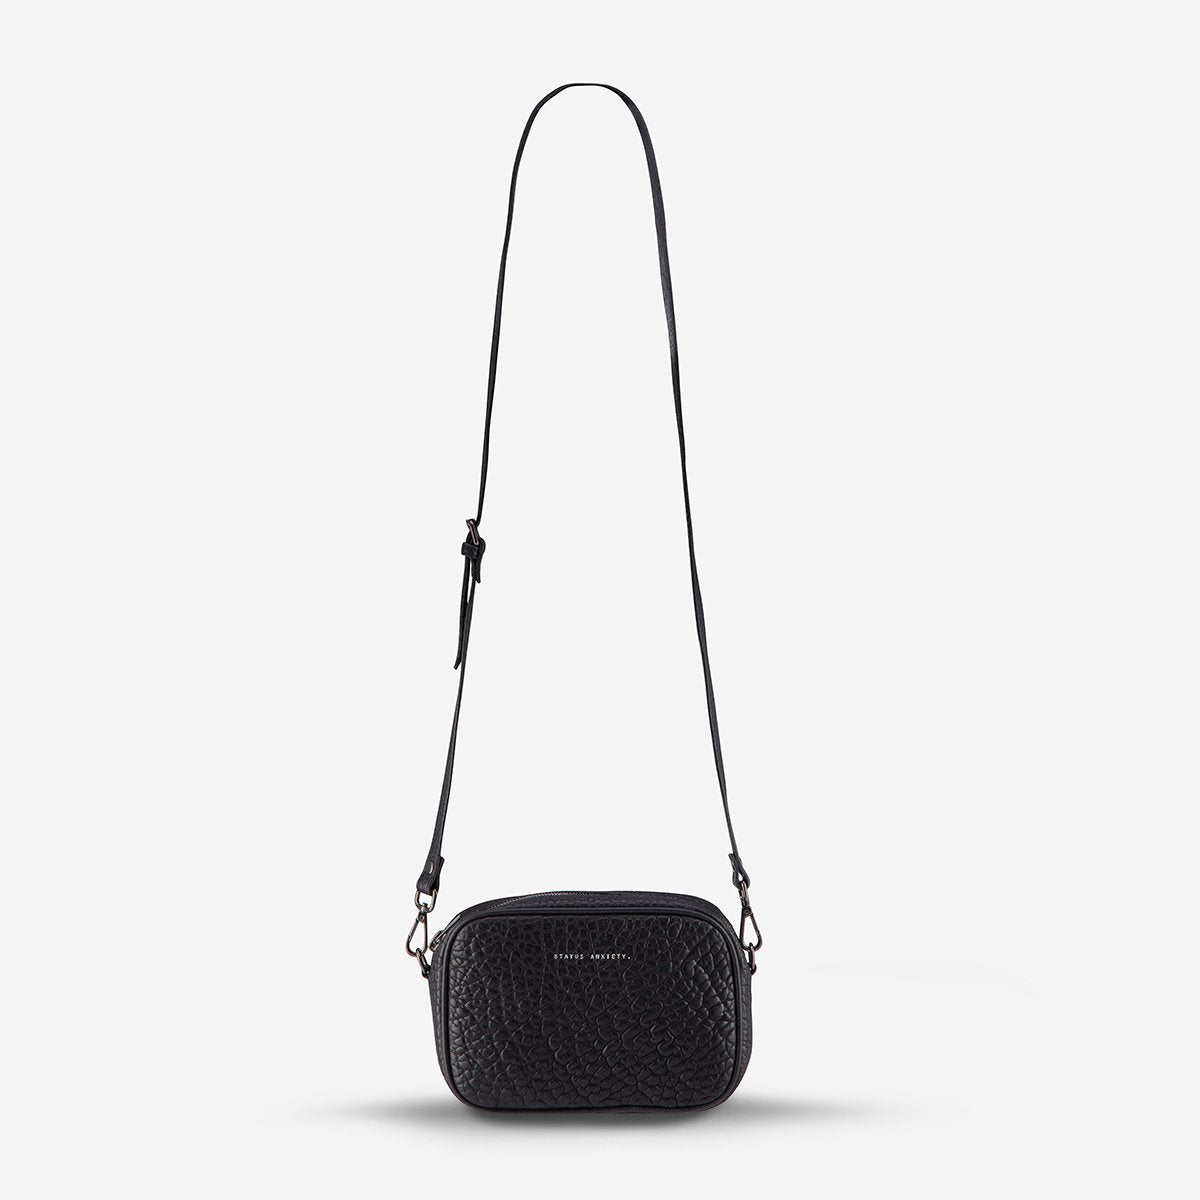 STATUS ANXIETY // Plunder Bag BLACK BUBBLE